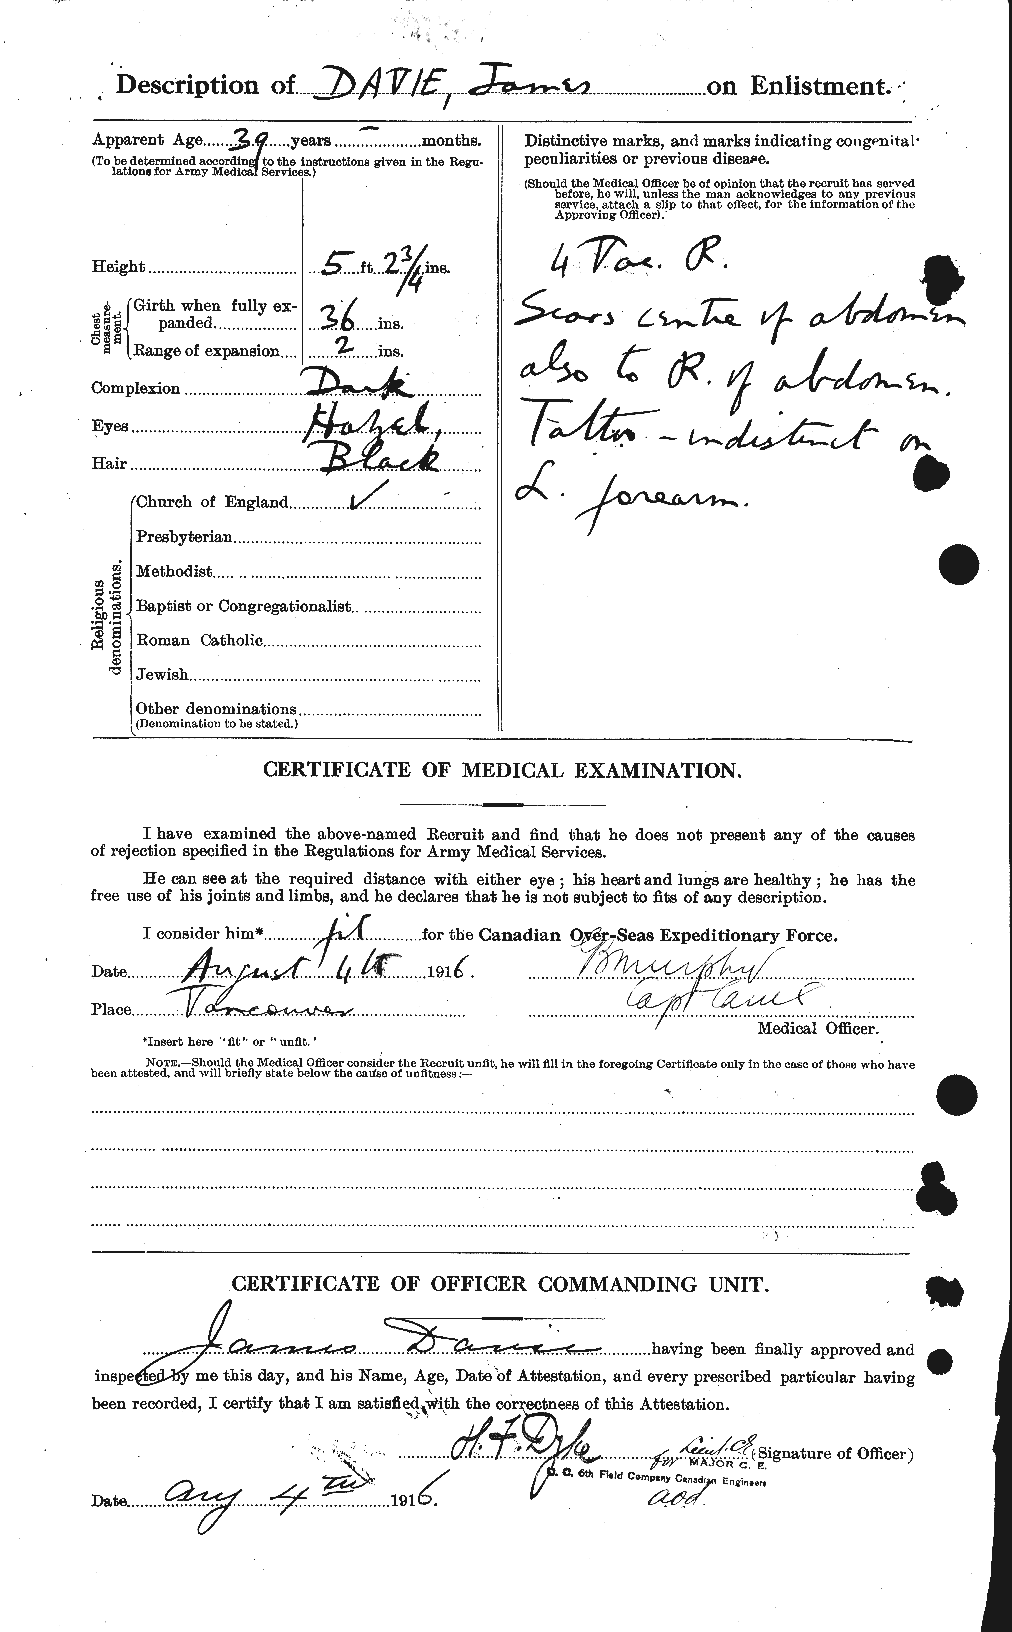 Personnel Records of the First World War - CEF 278827b